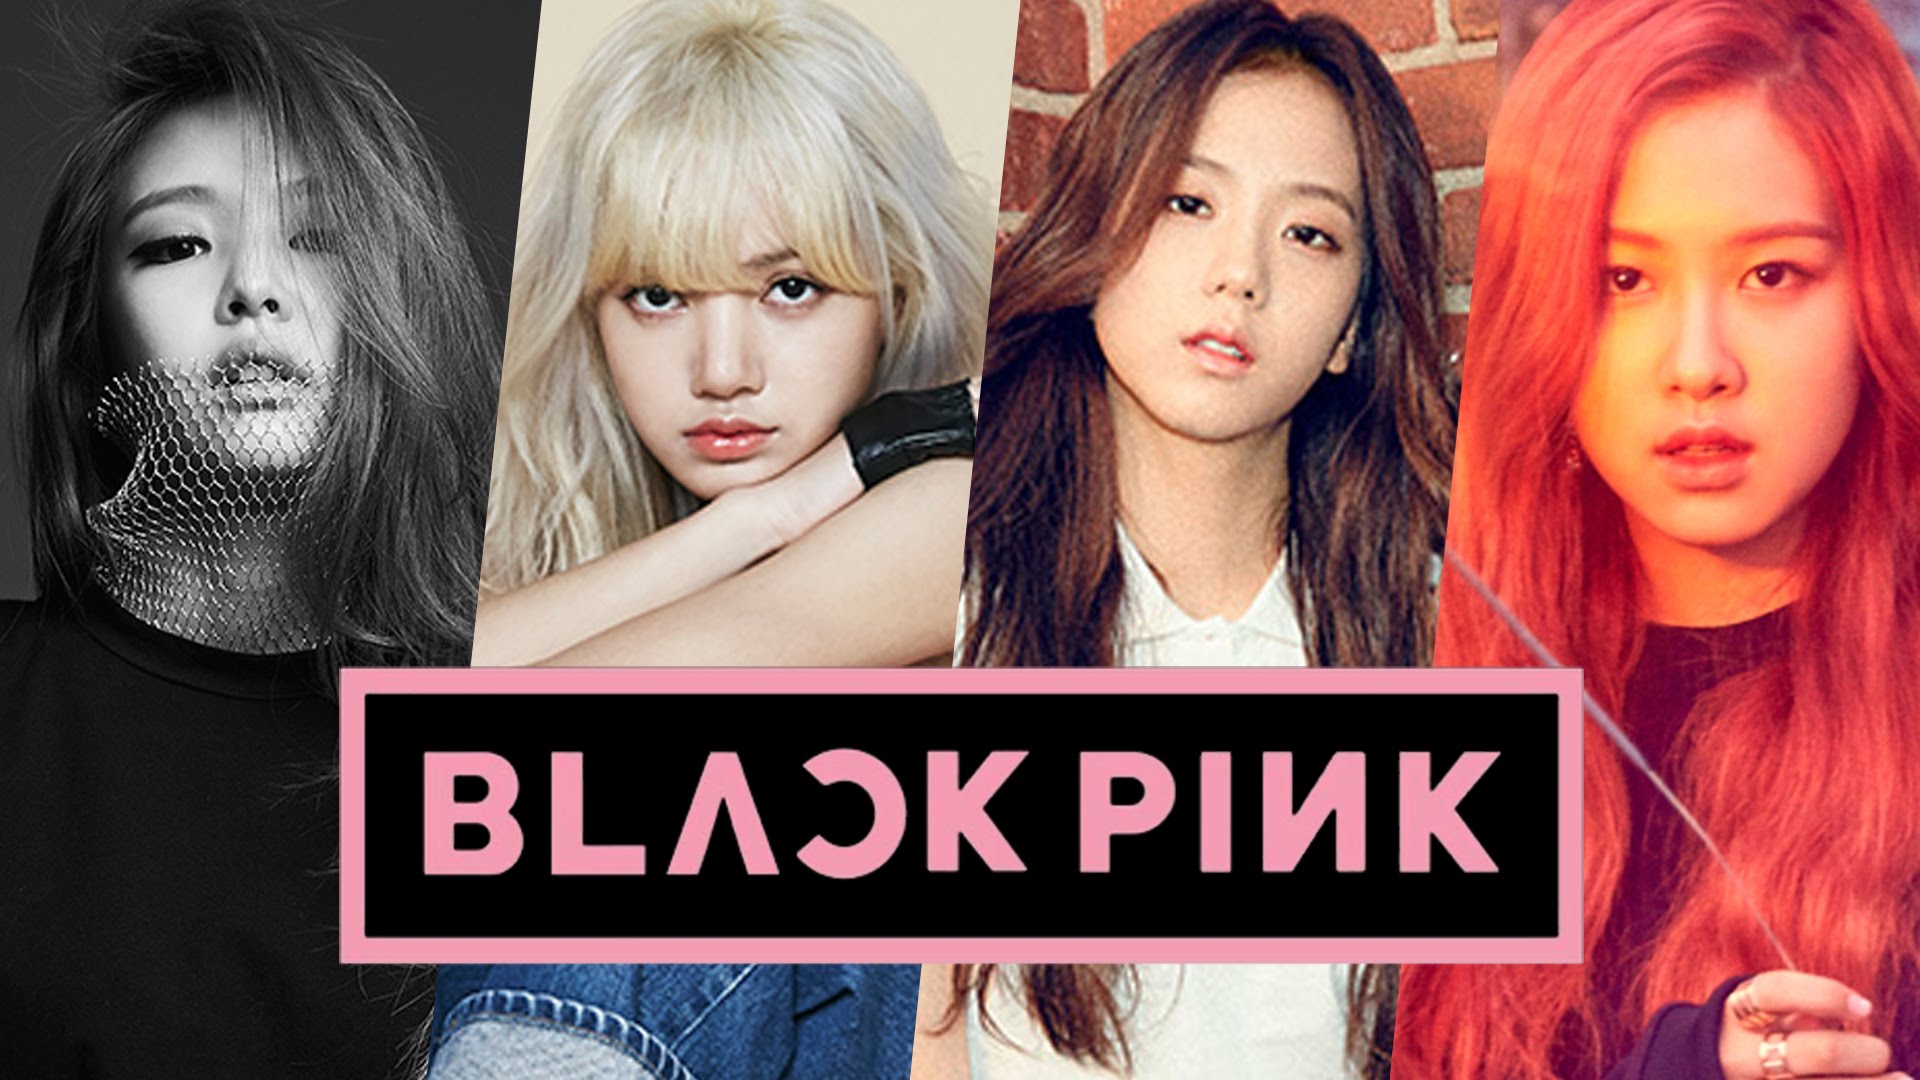 Free download Black Pink images BLACKPINK HD wallpaper and background photos [1920x1080] for